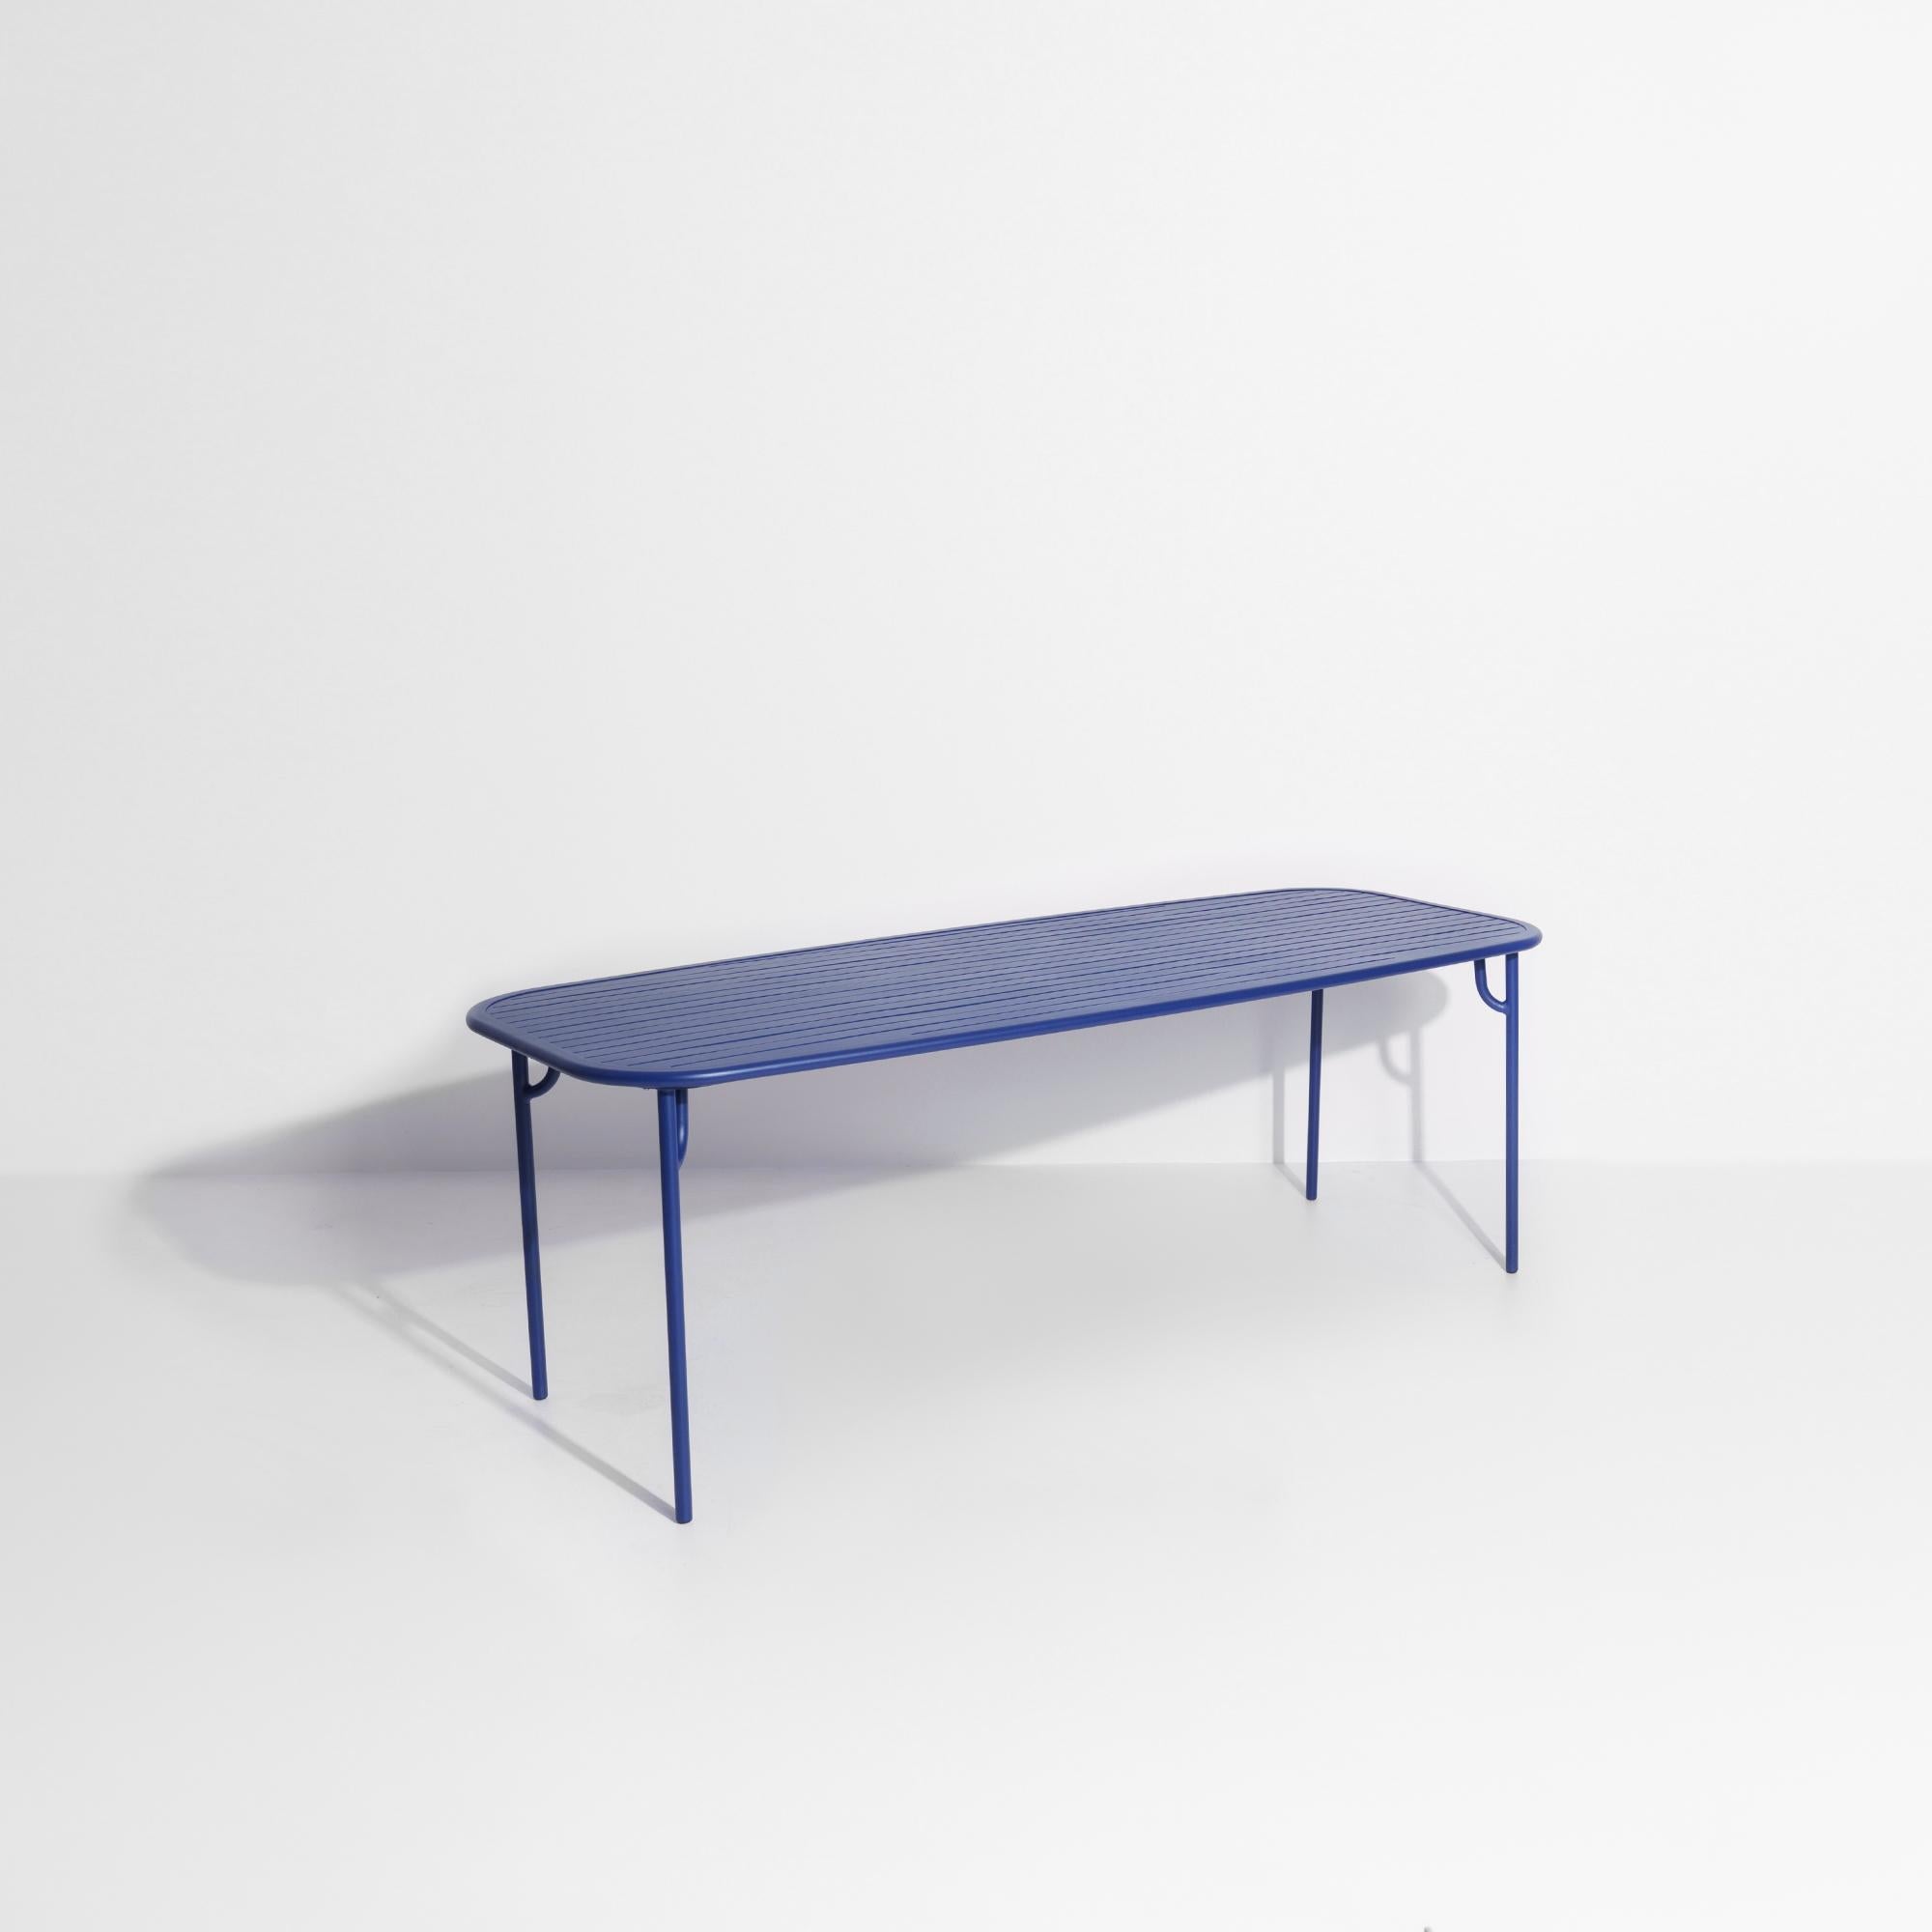 Contemporary Petite Friture Week-End Large Rectangular Dining Table in Blue with Slats For Sale